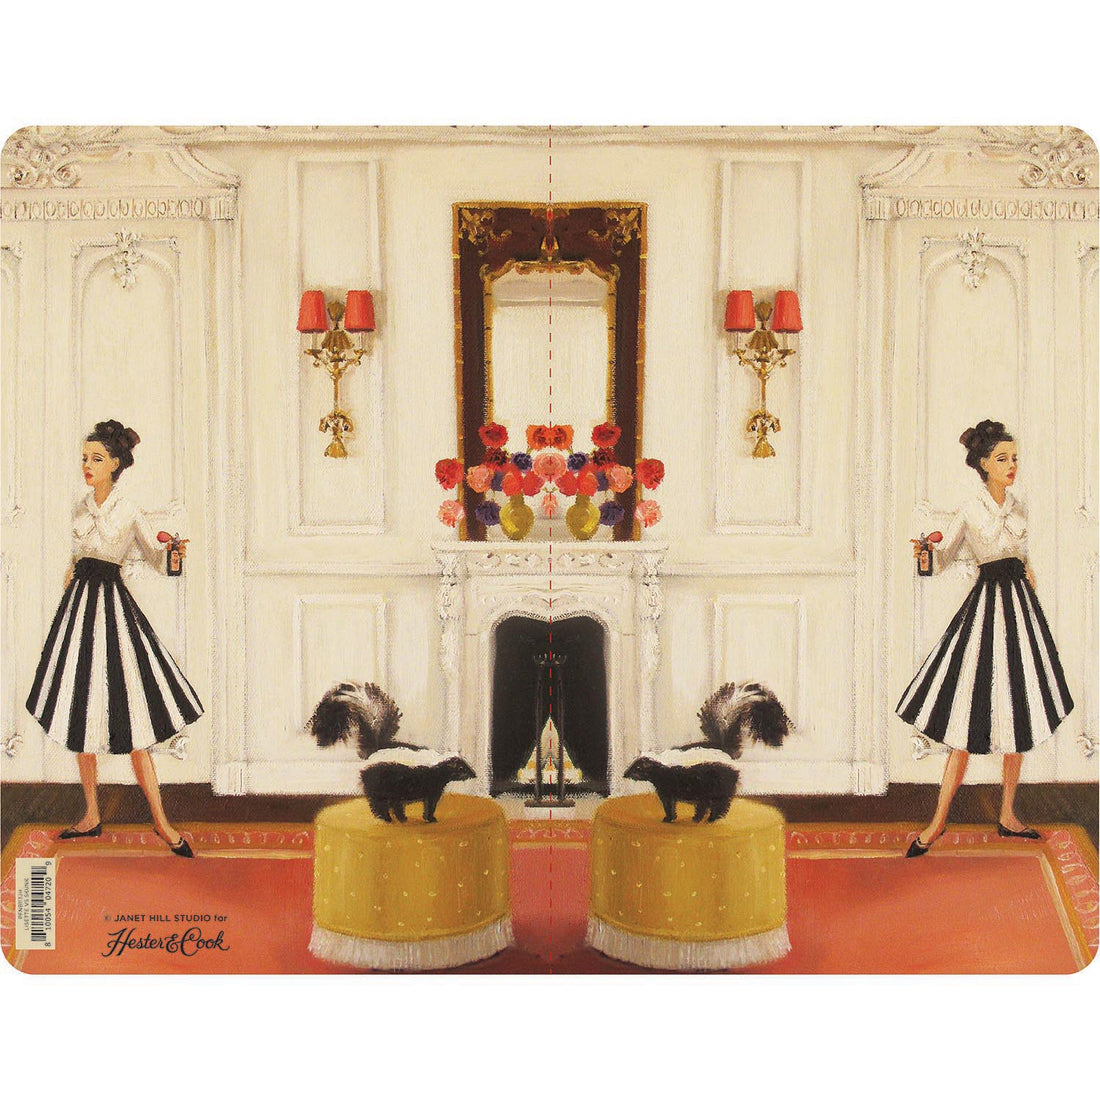 The back and front cover of an open Lisette vs Skunk Notebook, showing the same artwork mirrored on each side.